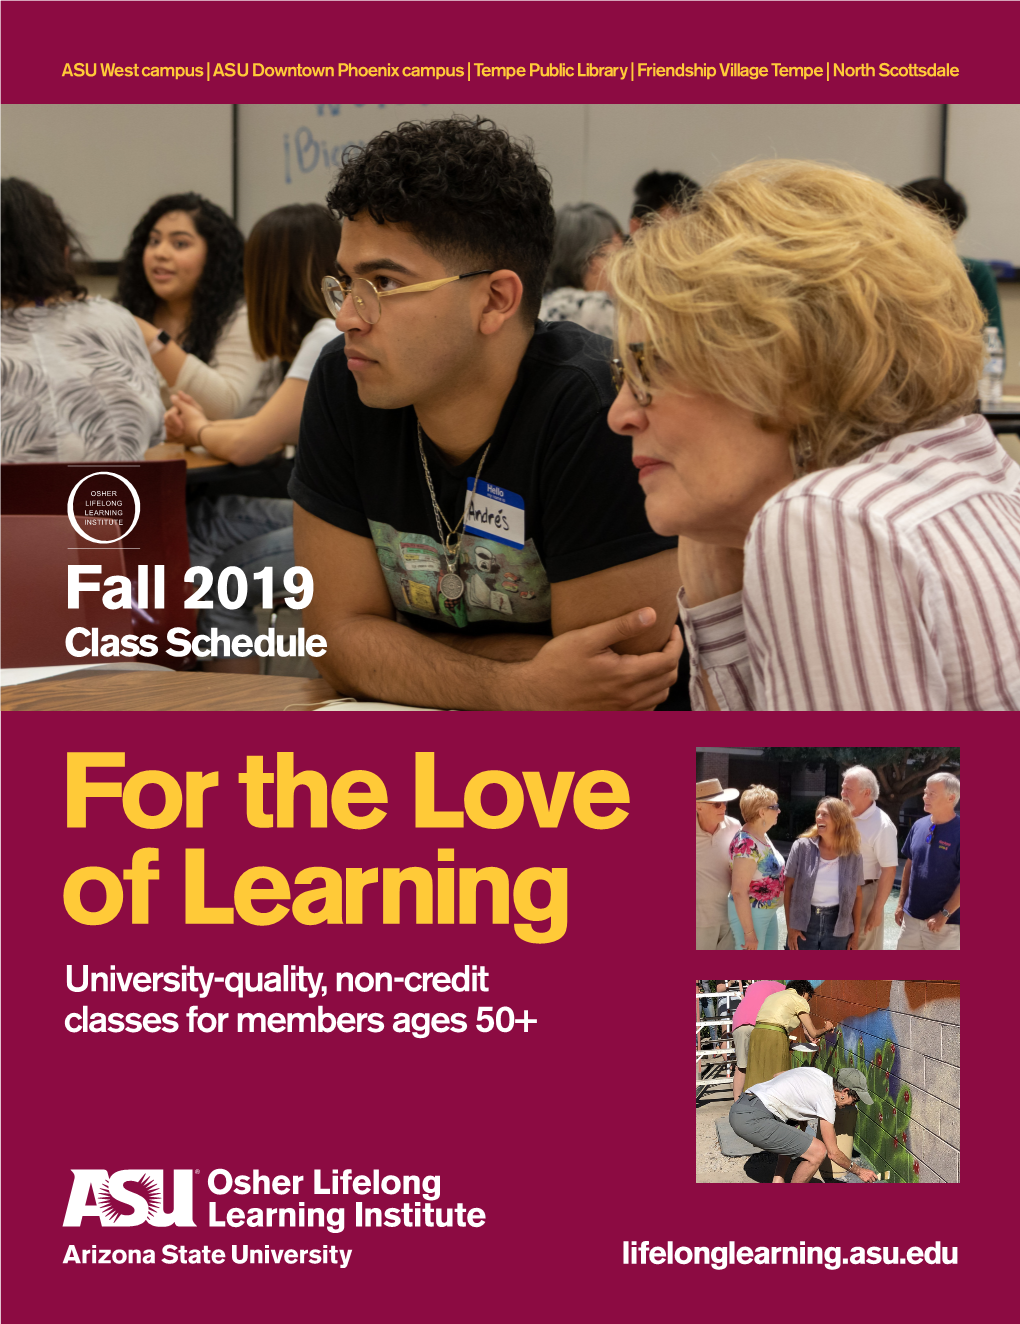 Fall 2019 Class Schedule for the Love of Learning University-Quality, Non-Credit Classes for Members Ages 50+